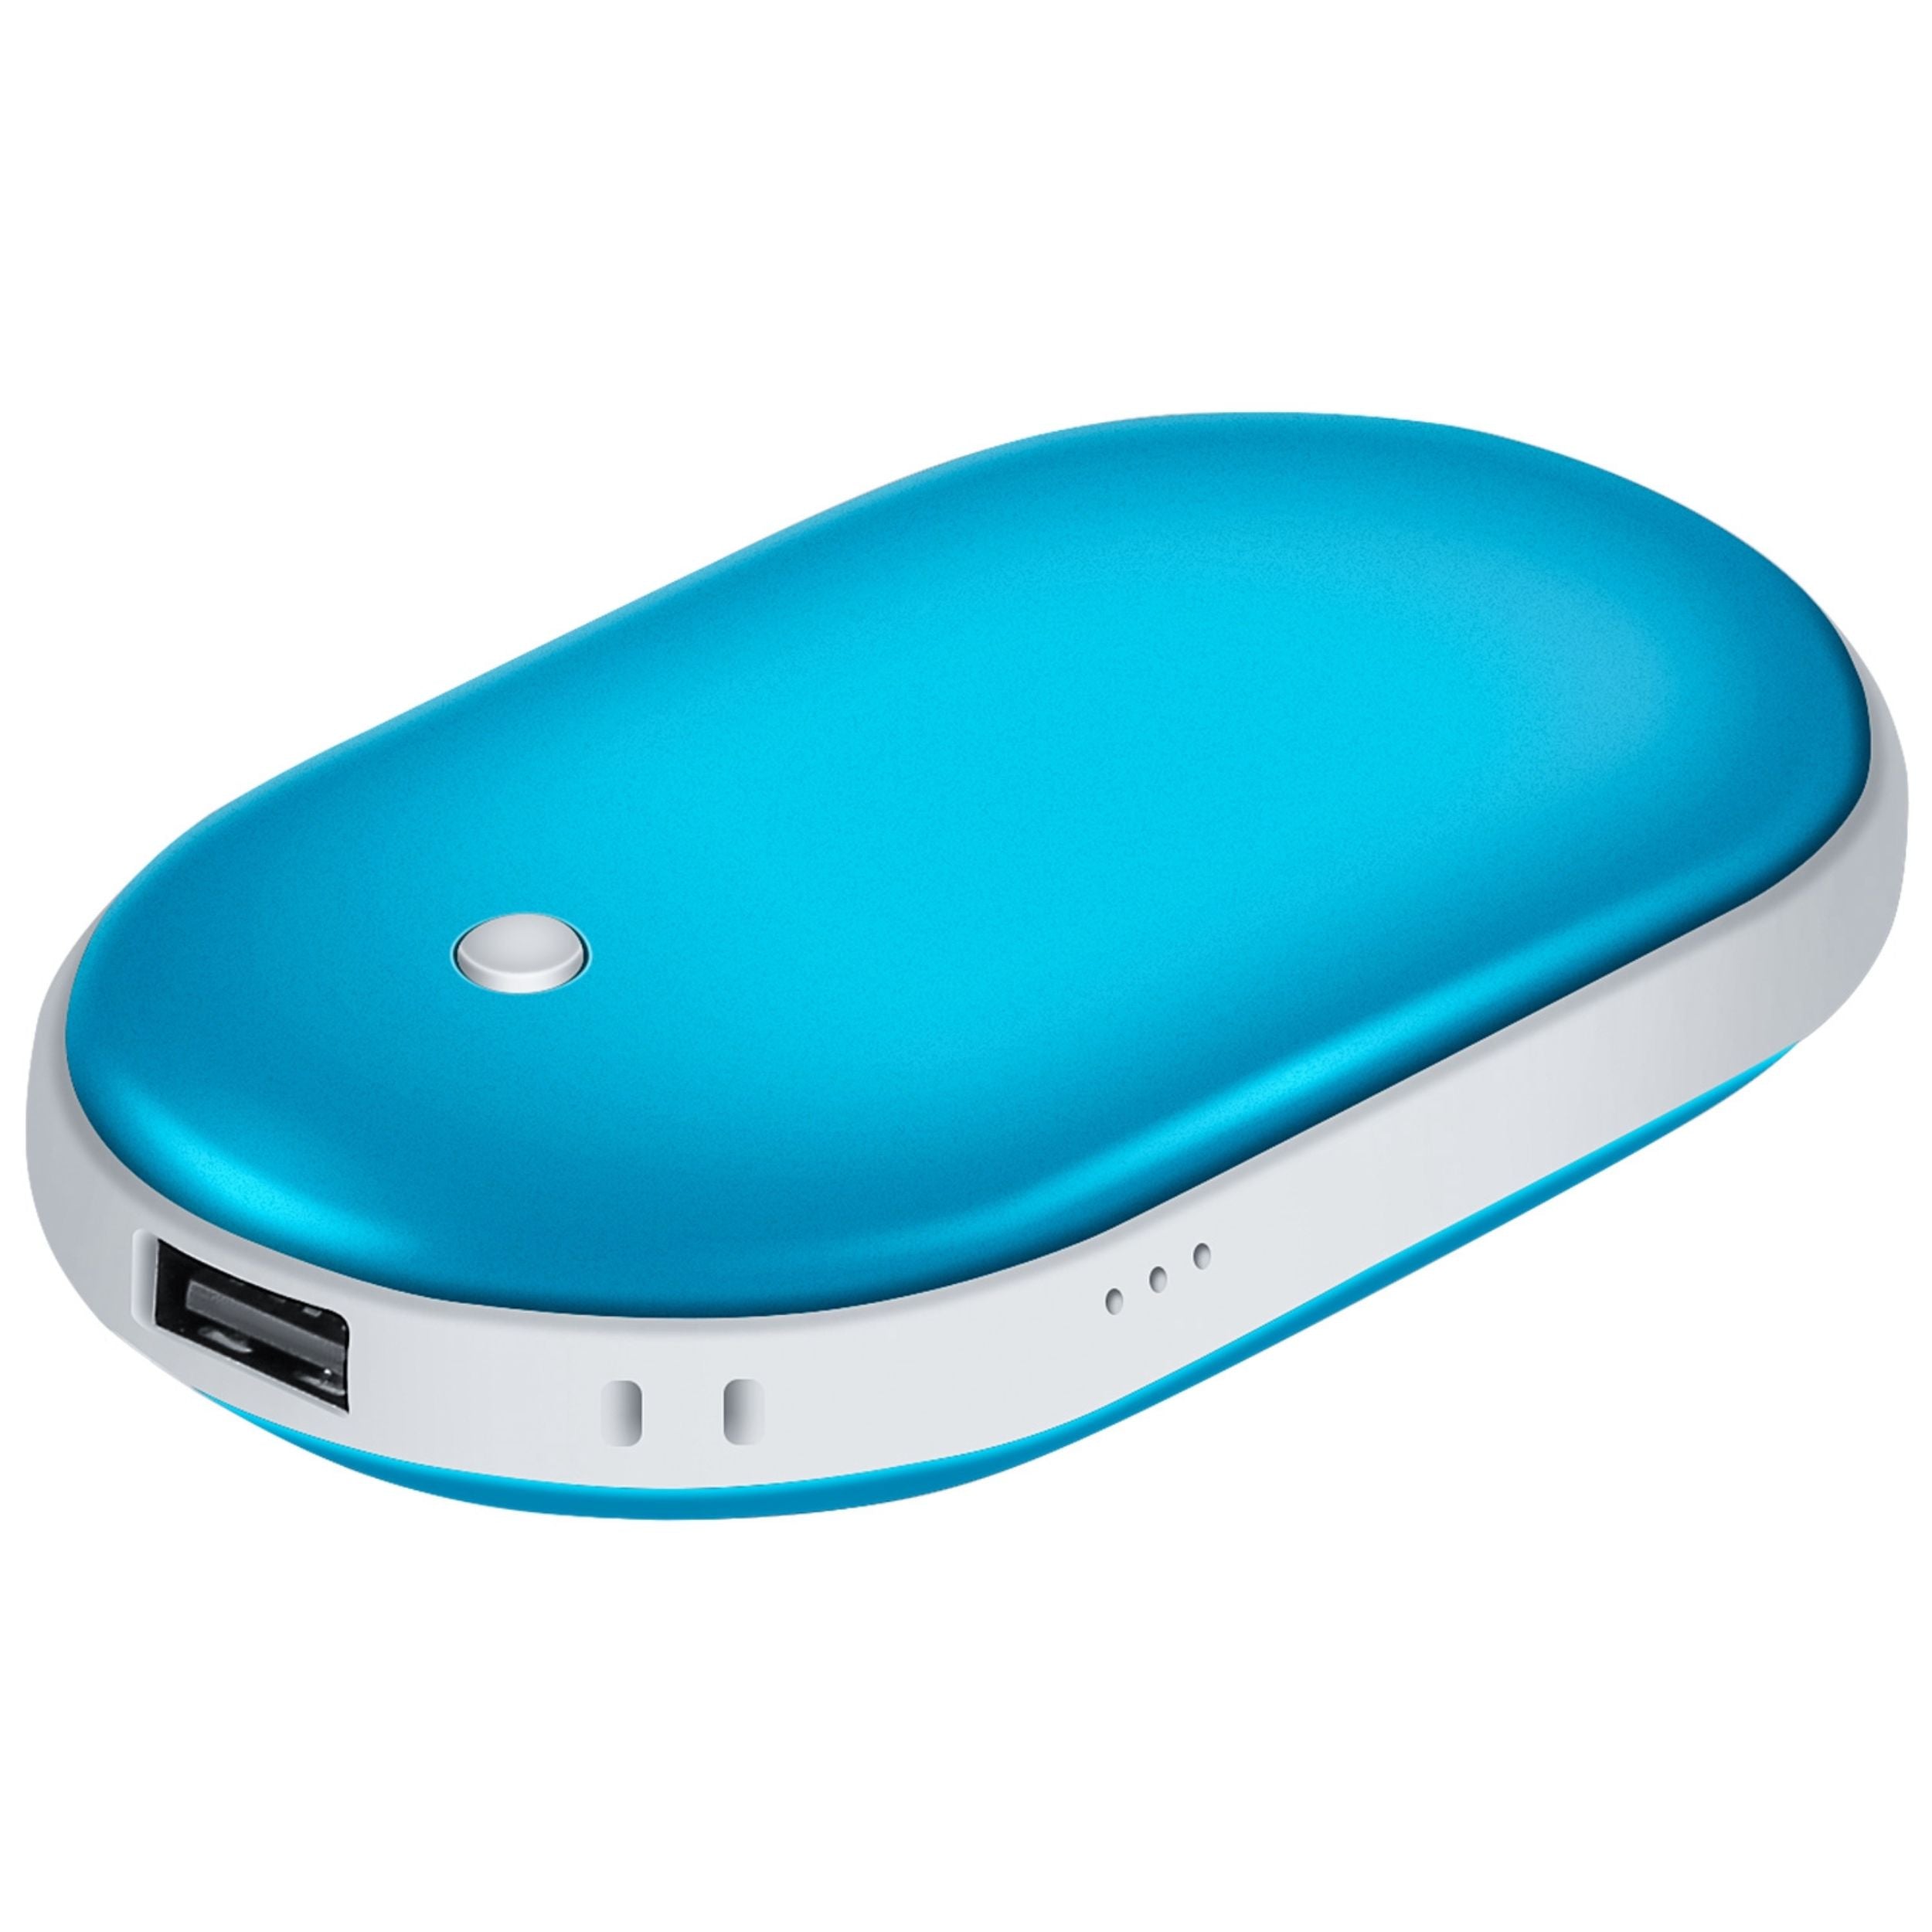 title:5000mAh Portable Hand Warmer & Power Bank - Rechargeable, Double-Sided Heating, Pocket Size;color:Blue